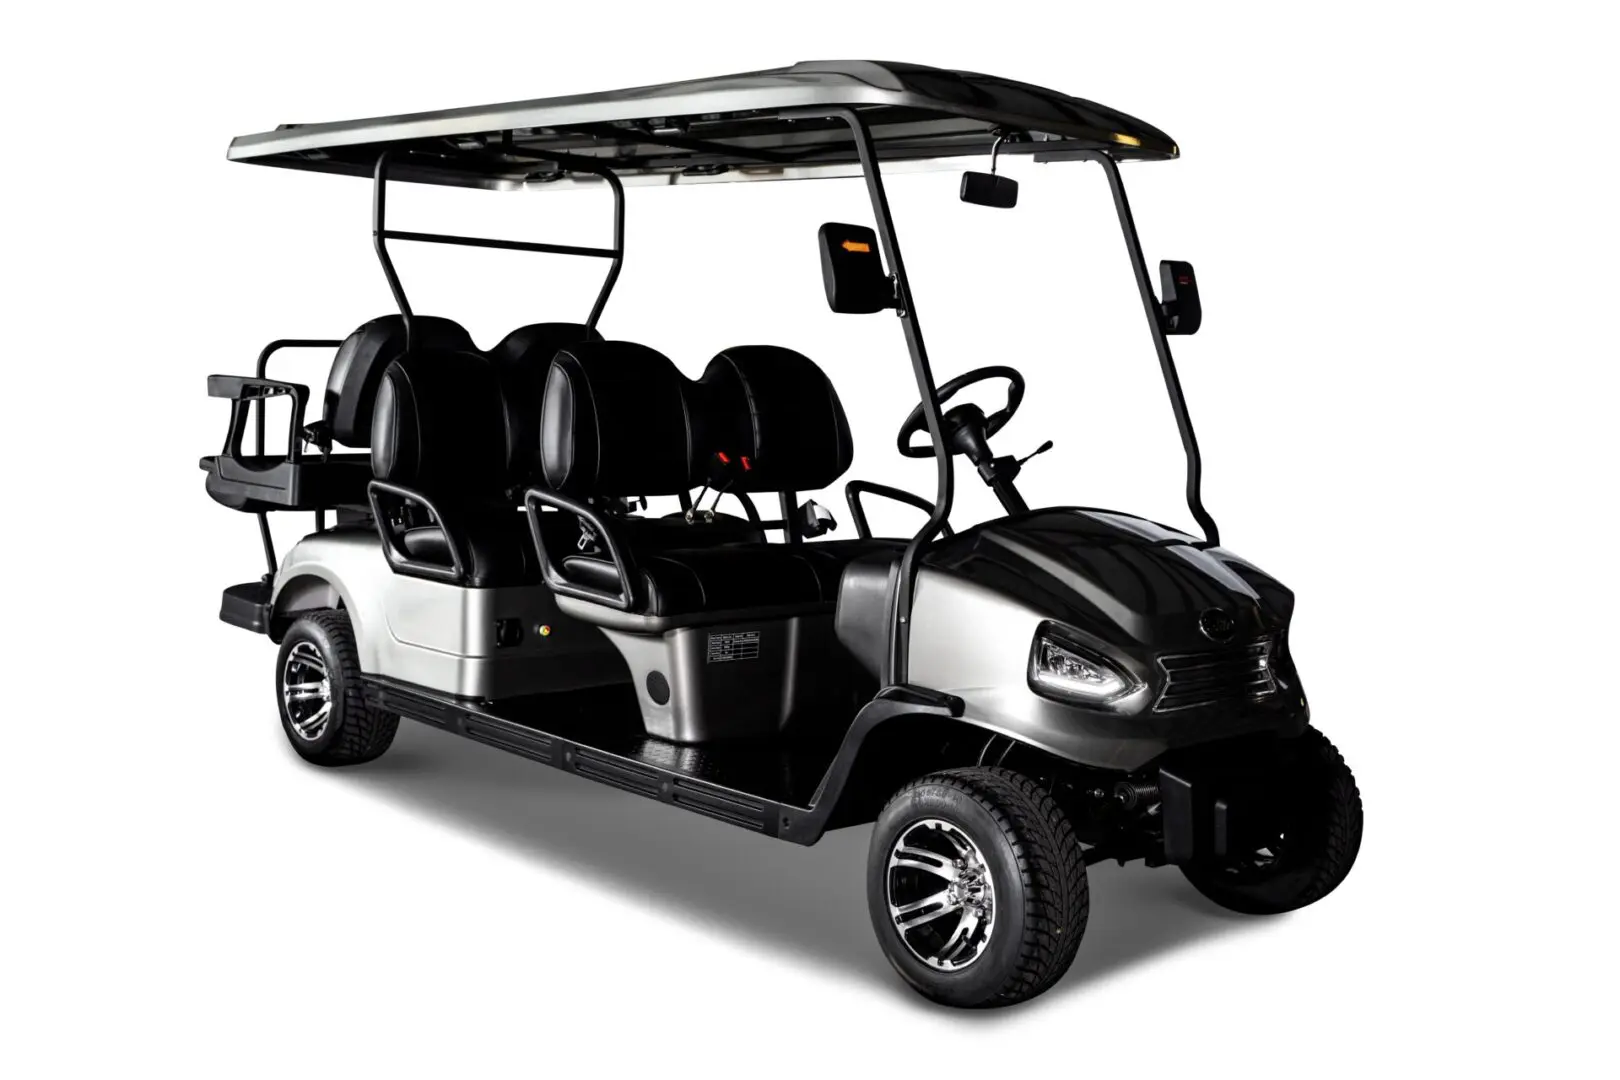 A golf cart with six seats and a canopy.